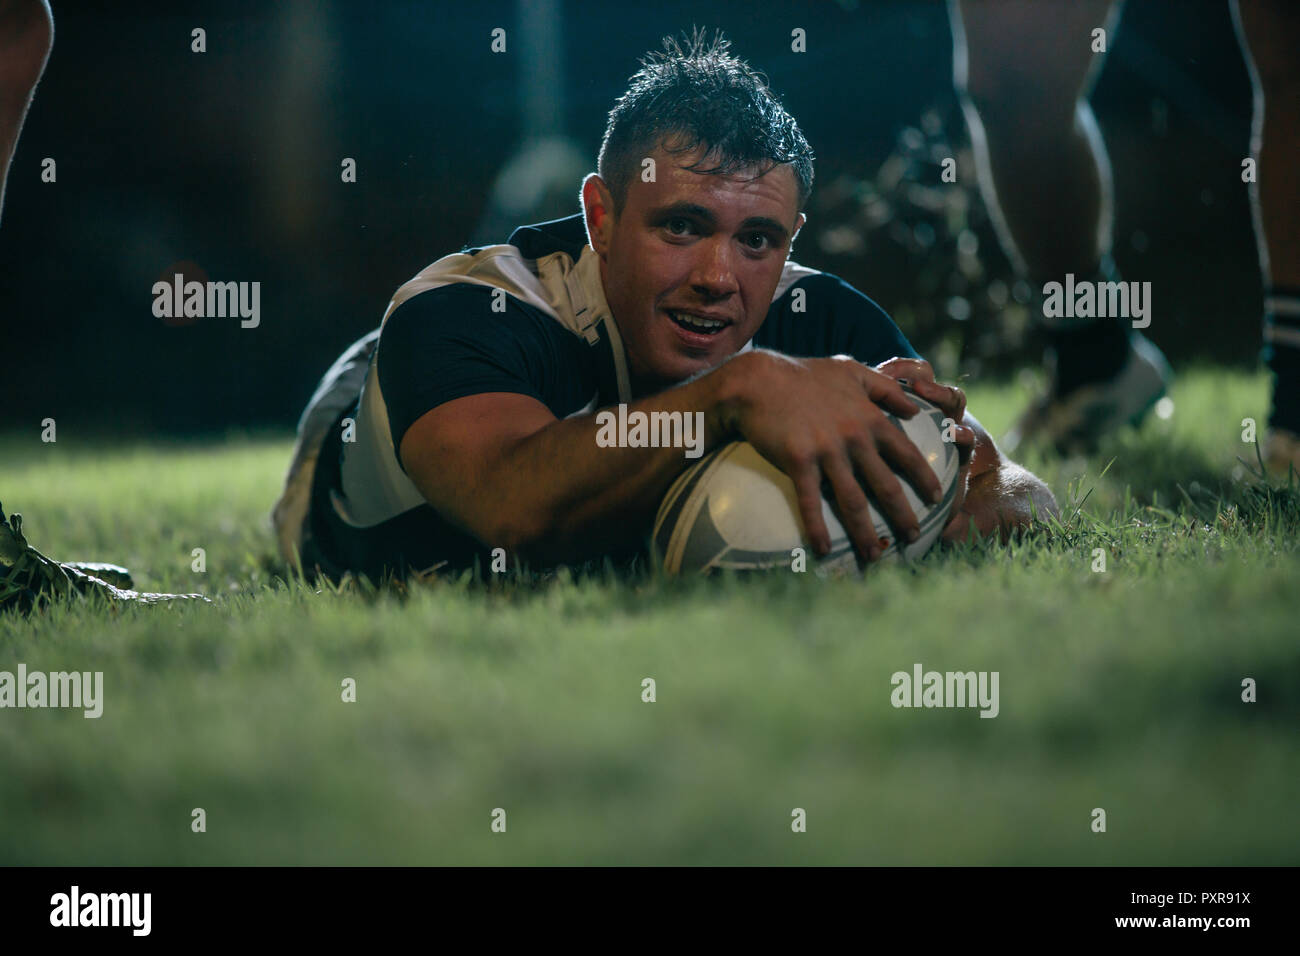 Rugby player scores a touchdown during the game. Rugby player making a touch down during the match. Stock Photo